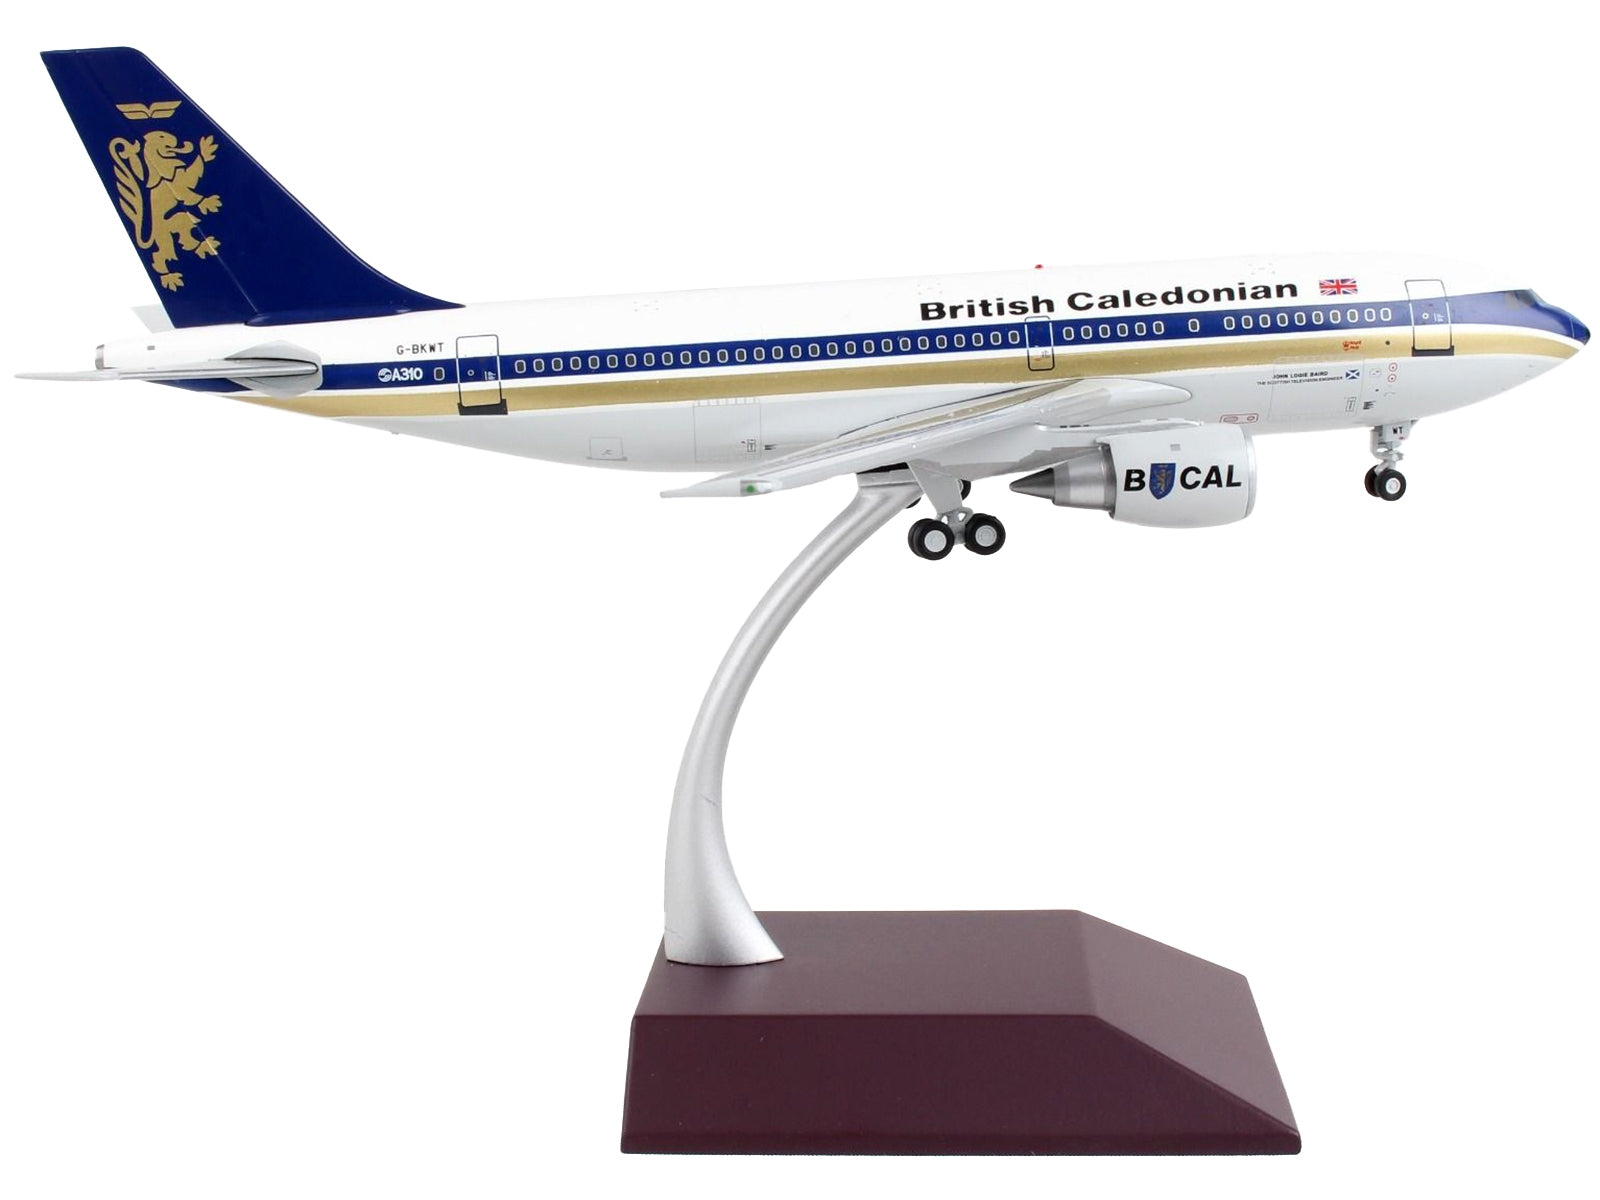 Airbus A310-200 Commercial Aircraft "British Caledonian" White with Blue Stripes and Tail "Gemini 200" Series 1/200 Diecast Model Airplane by GeminiJets GeminiJets